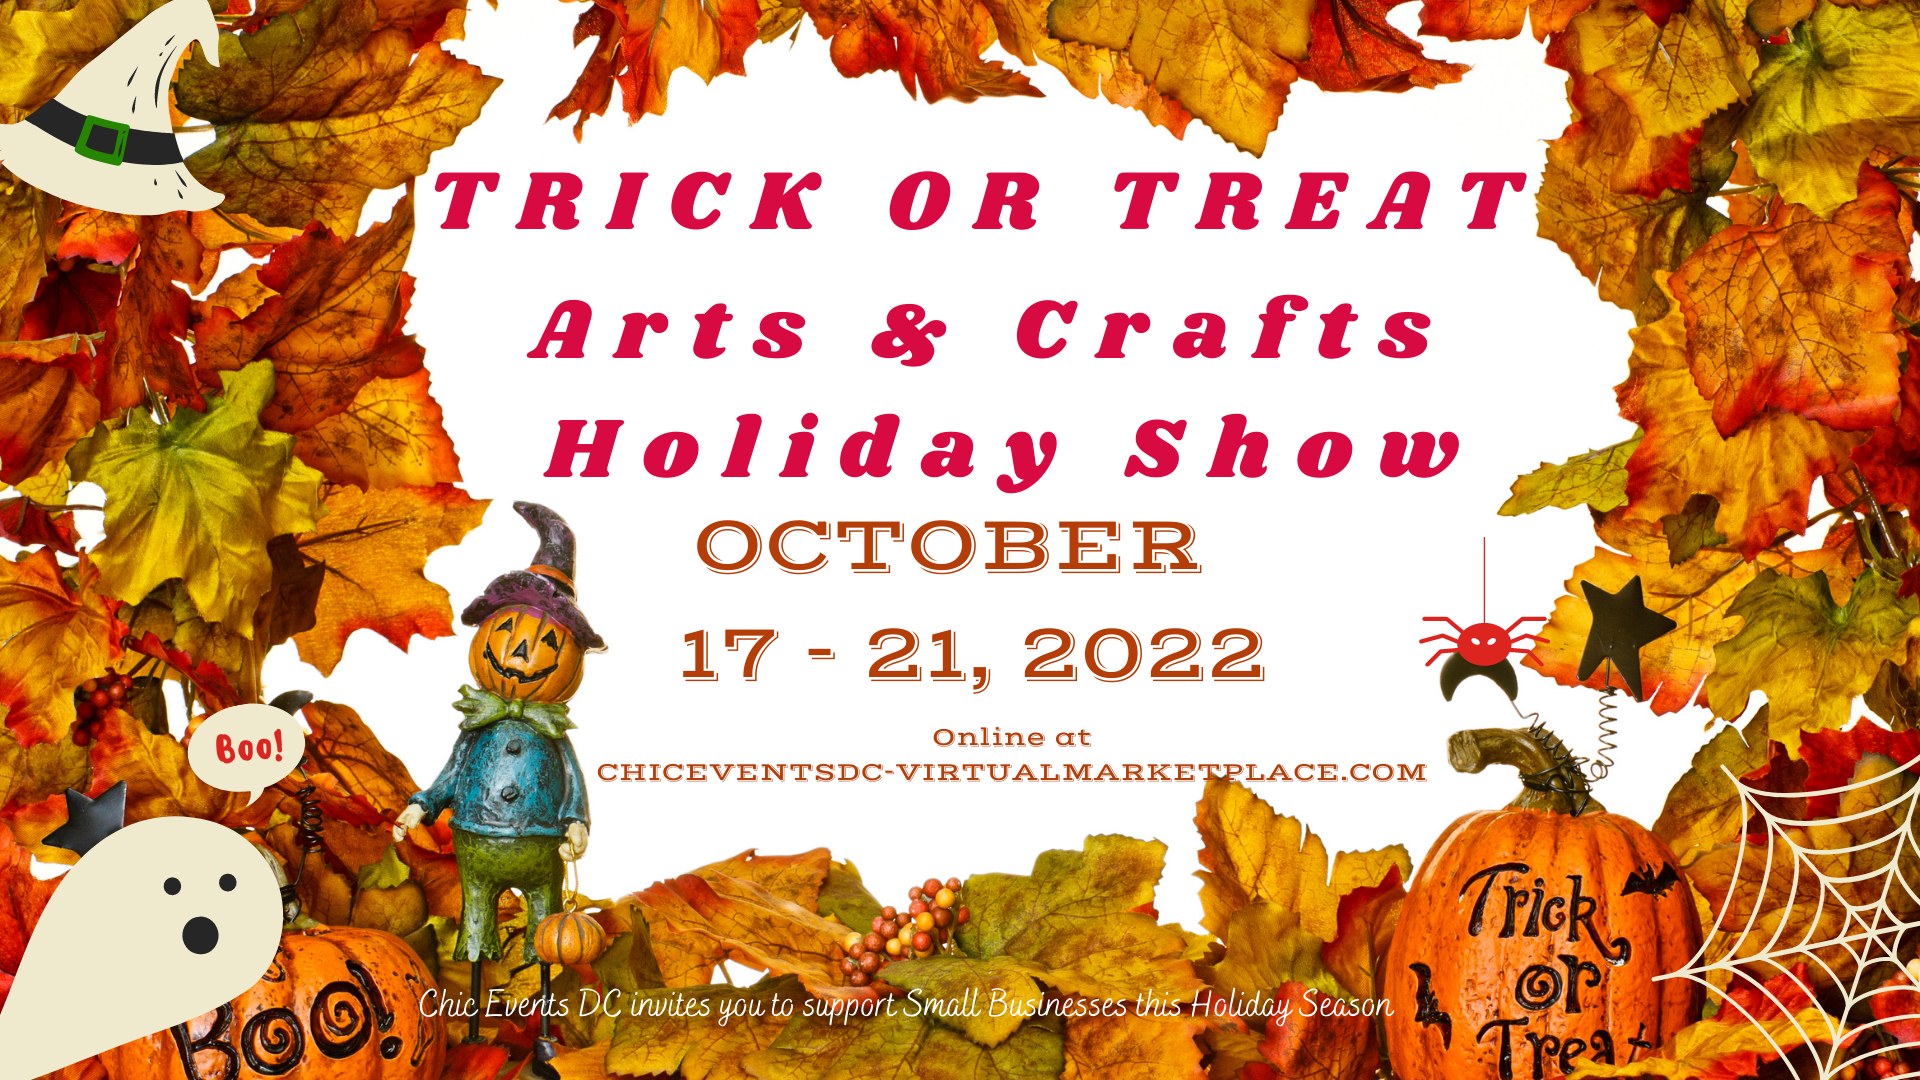 Trick or Treat Arts & Crafts Holiday Virtual Marketplace, Online Event